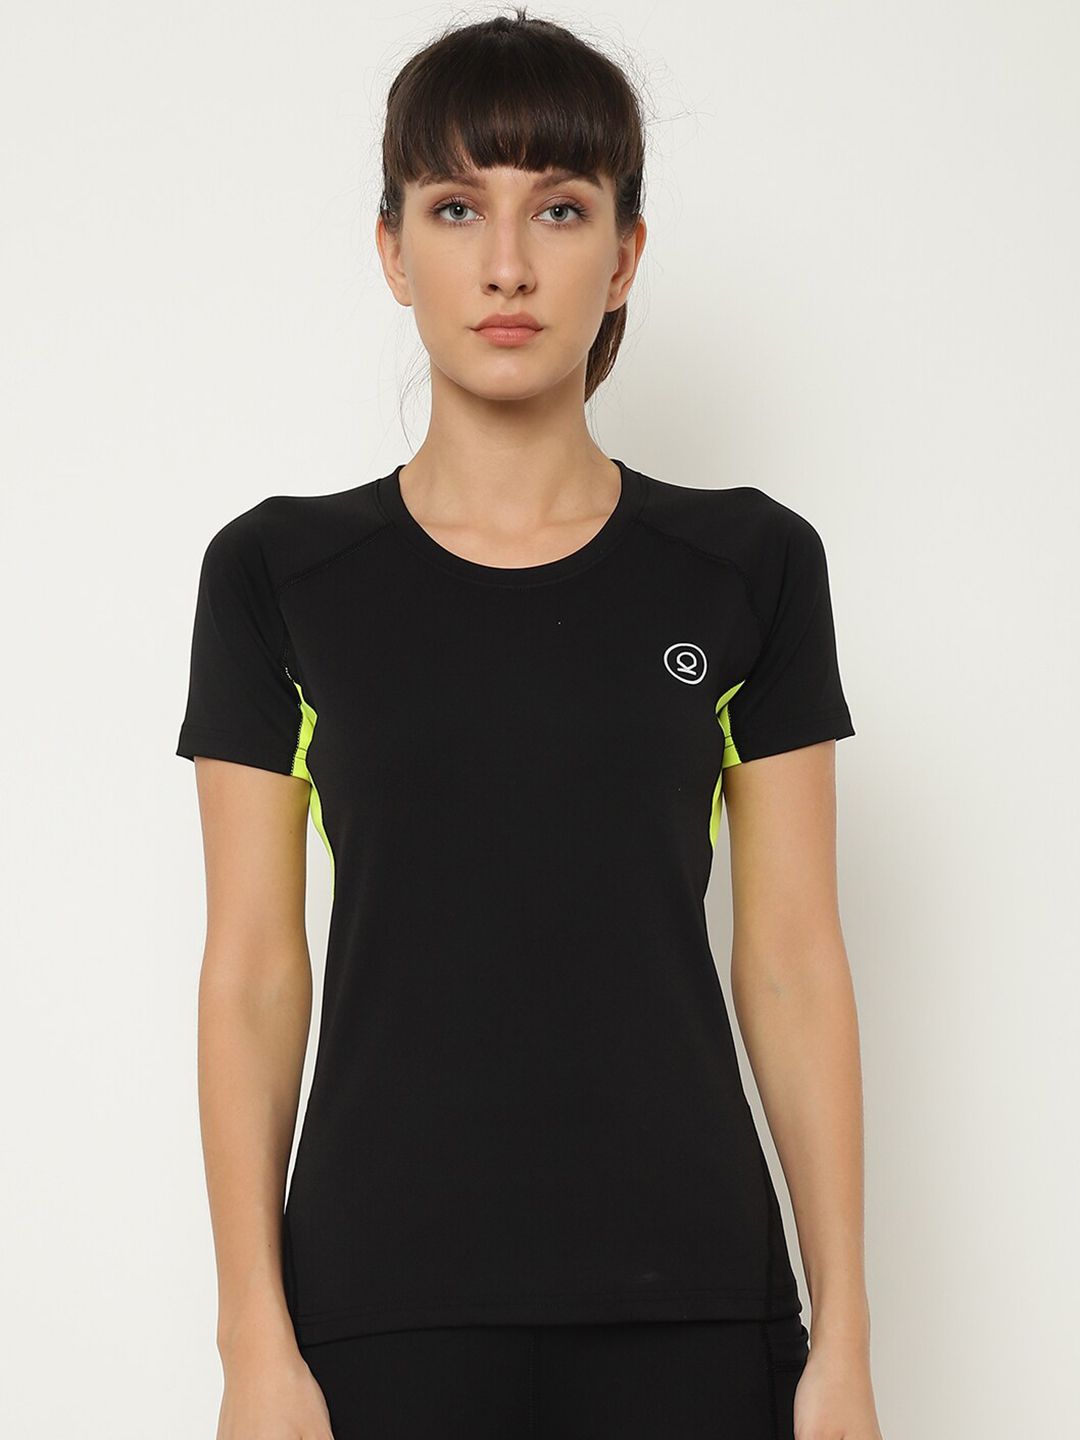 Chkokko Women Black & Fluorescent Green Antimicrobial Active Wear Sports T-shirt Price in India